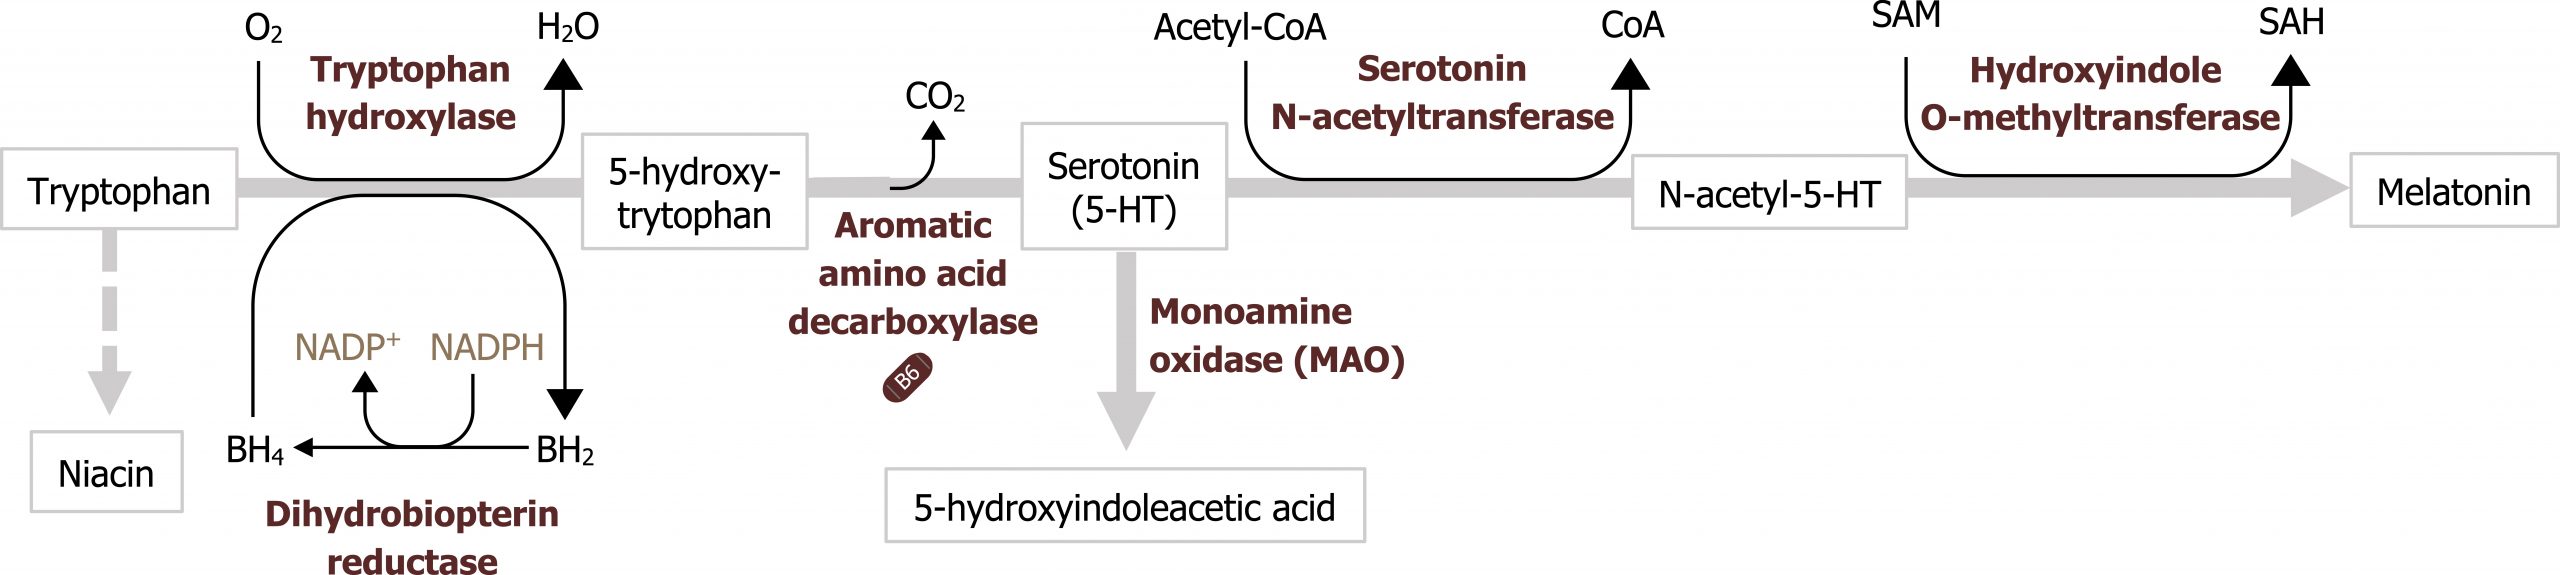 Tryptophan arrow with O2 arrow H2O, BH4 arrow BH2, and enzyme tryptophan hydroxylase to 5-hydroxy-tryptophan arrow with CO2 loss and enzyme aromatic amino acid decarboxylase to serotonin (5-HT) arrow with acetyl-CoA arrow CoA and enzyme serotonin N-acetyltransferase to N-acetyl-5-HT arrow with SAM arrow SAH and enzyme Hydroxyindole O-methyltransferase to melatonin. Tryptophan arrow niacin. Serotonin (5-HT) arrow 5-hydroxyindoleacetic acid. BH2 arrow with NADPH arrow NADP+ and enzyme dihydrobiopterin reductase to BH4.